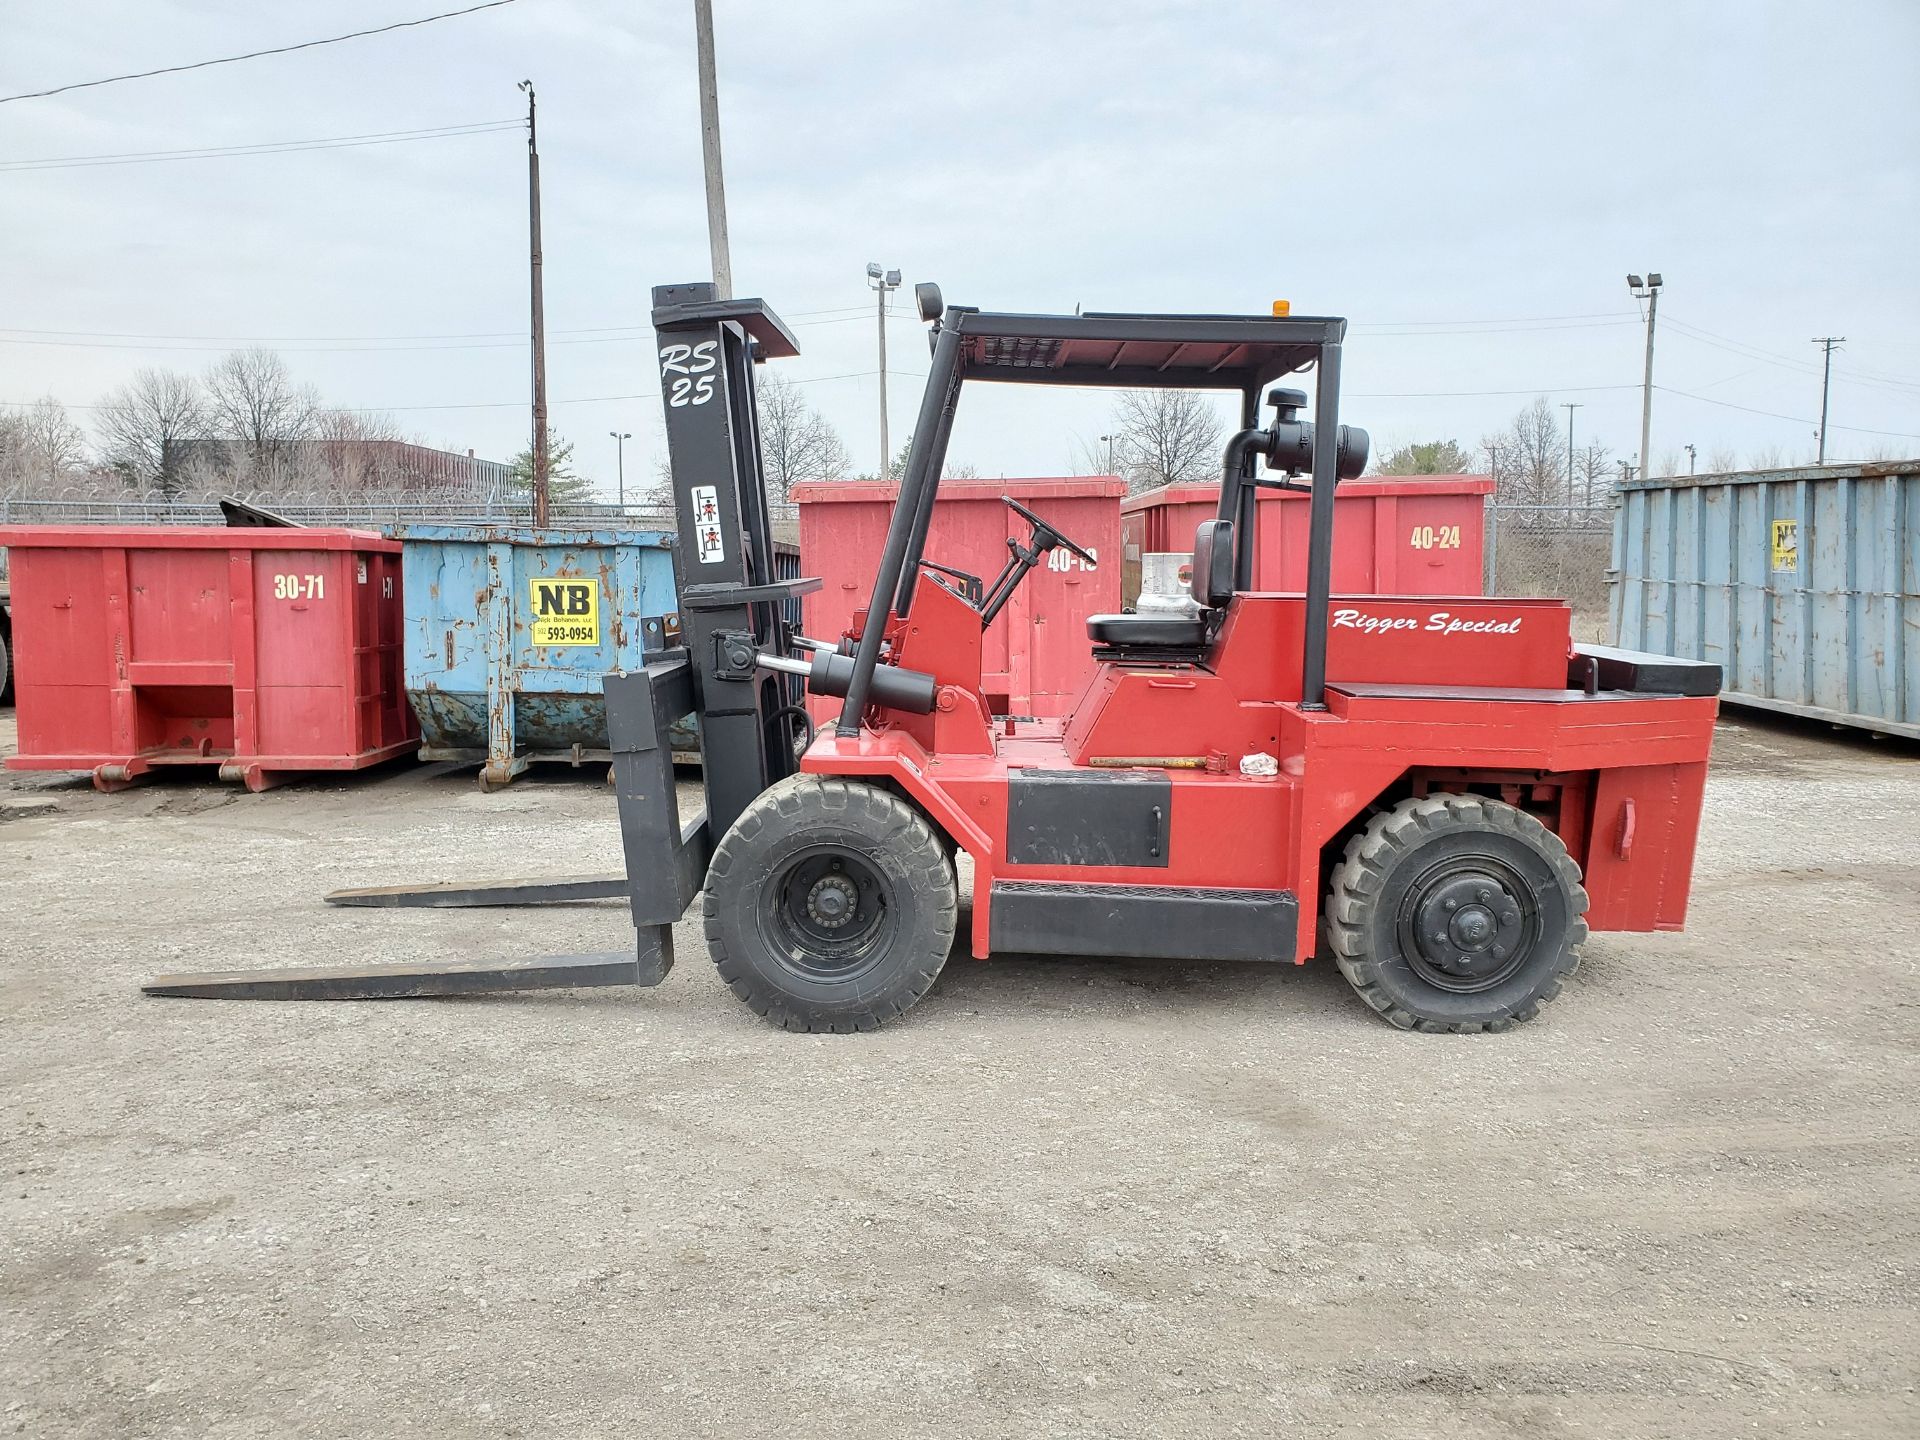 RIGGERS SPECIAL RS25 25,000 LB. CAP. LPG FORKLIFT, DUAL FRONT PNEUMATIC TIRES, 2-STAGE - Image 19 of 26